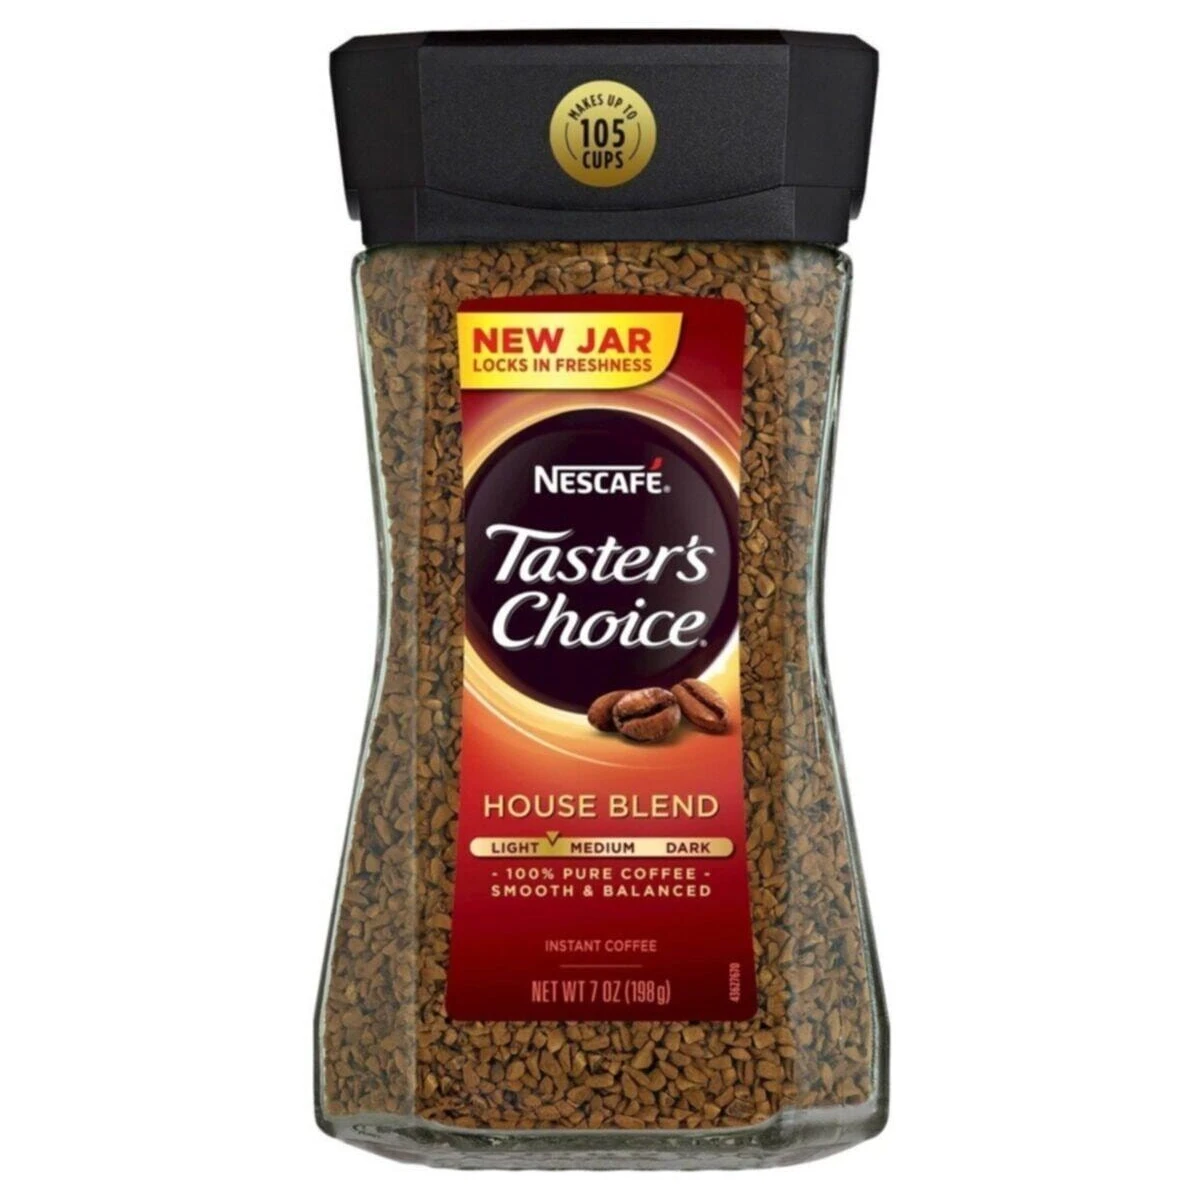 Nescafe Tasters Choice House Blend Instant Coffee